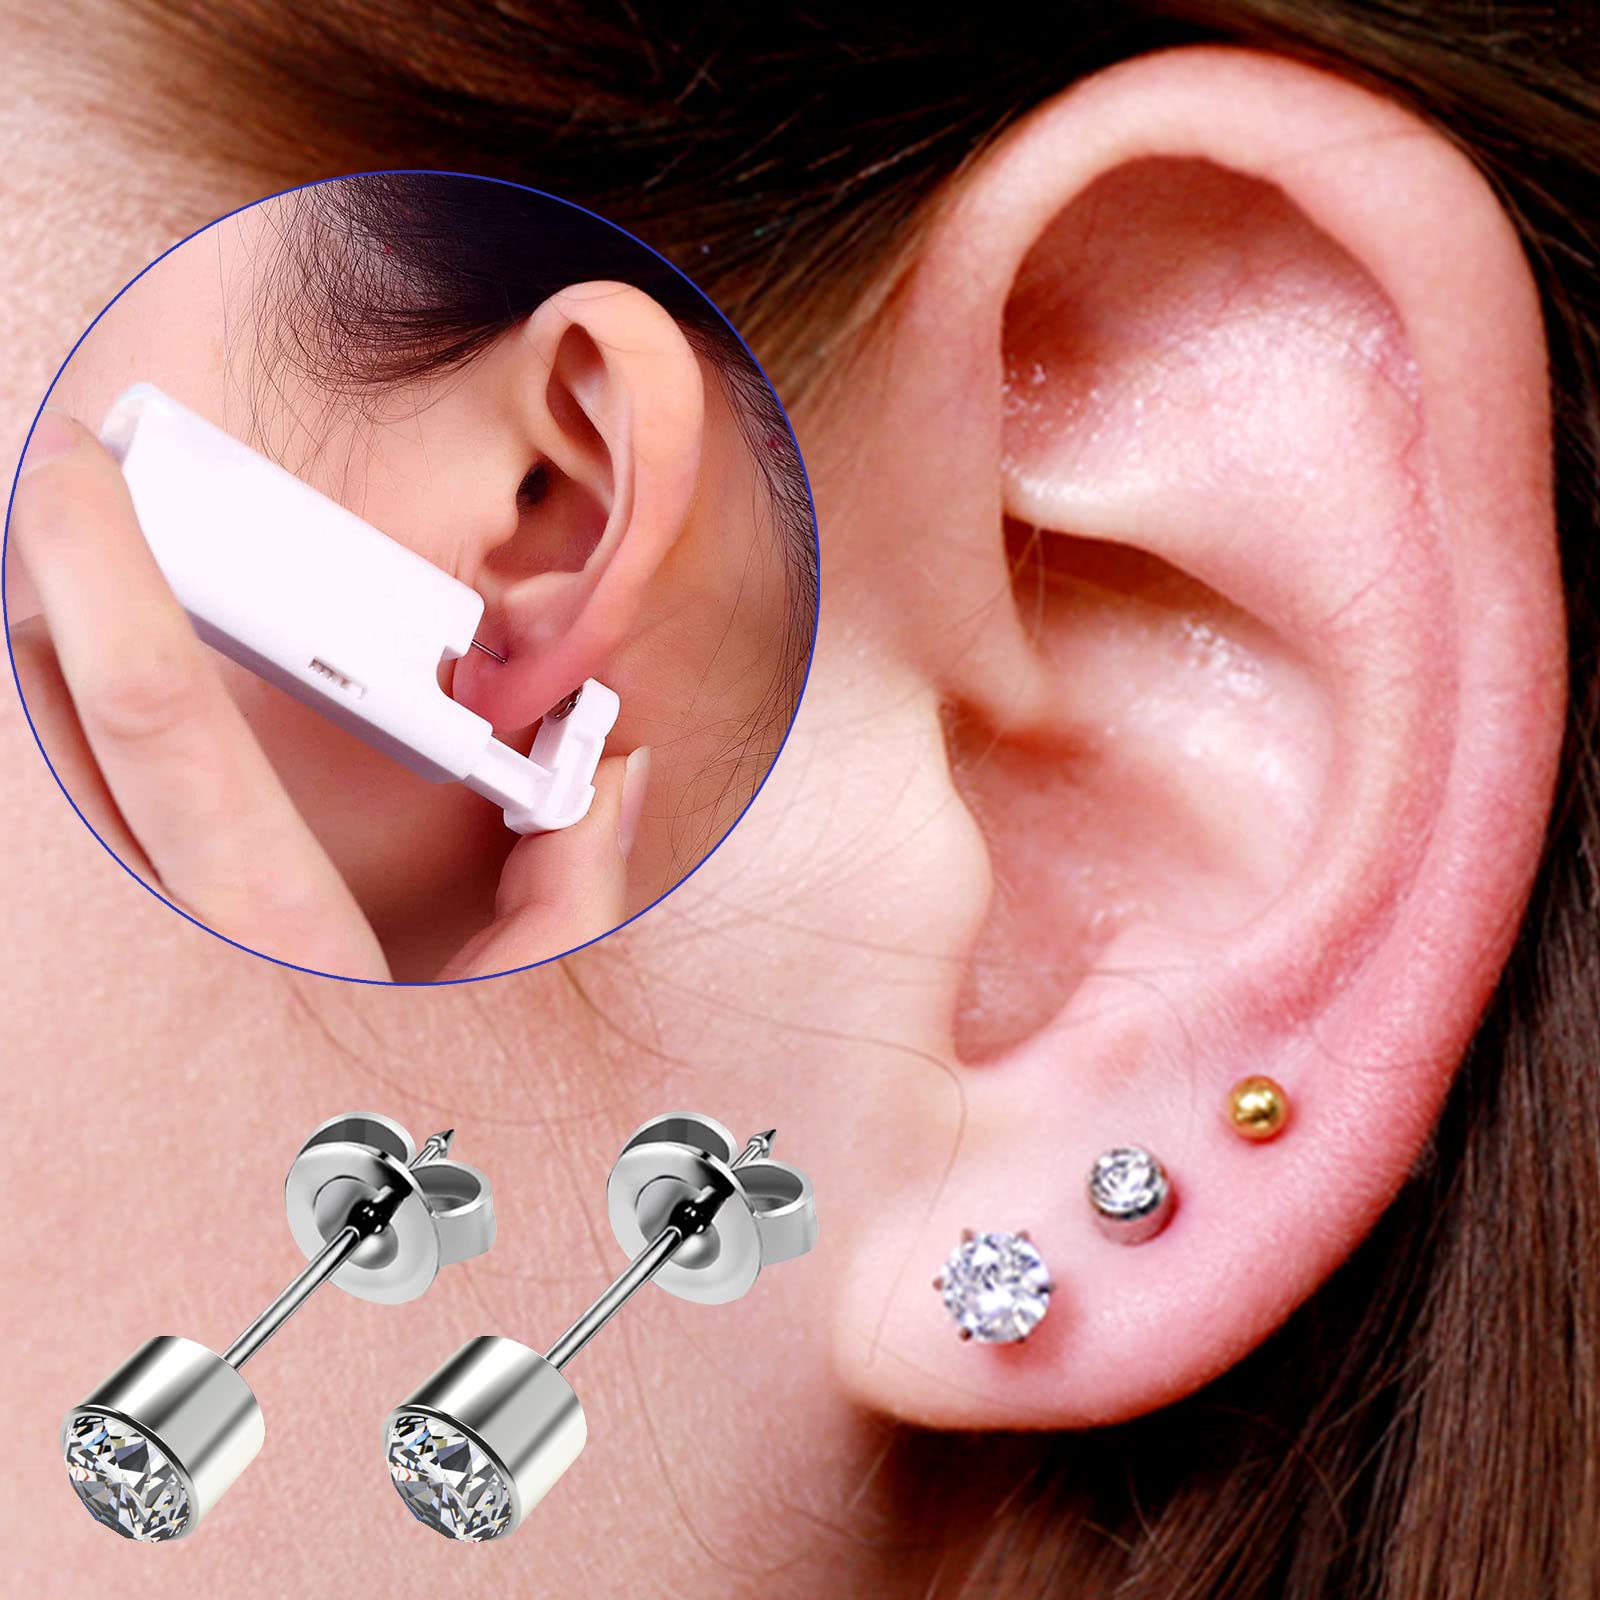 2Pcs Ear Piercing Kit Automatic and Painless Ear Nail Gun Disposable Aseptic Household Ear Piercing Gun Portable Ear Piercing Gun Group Ear Piercing Tools With Built-in 4mm Hypoallergenic Ear Studs